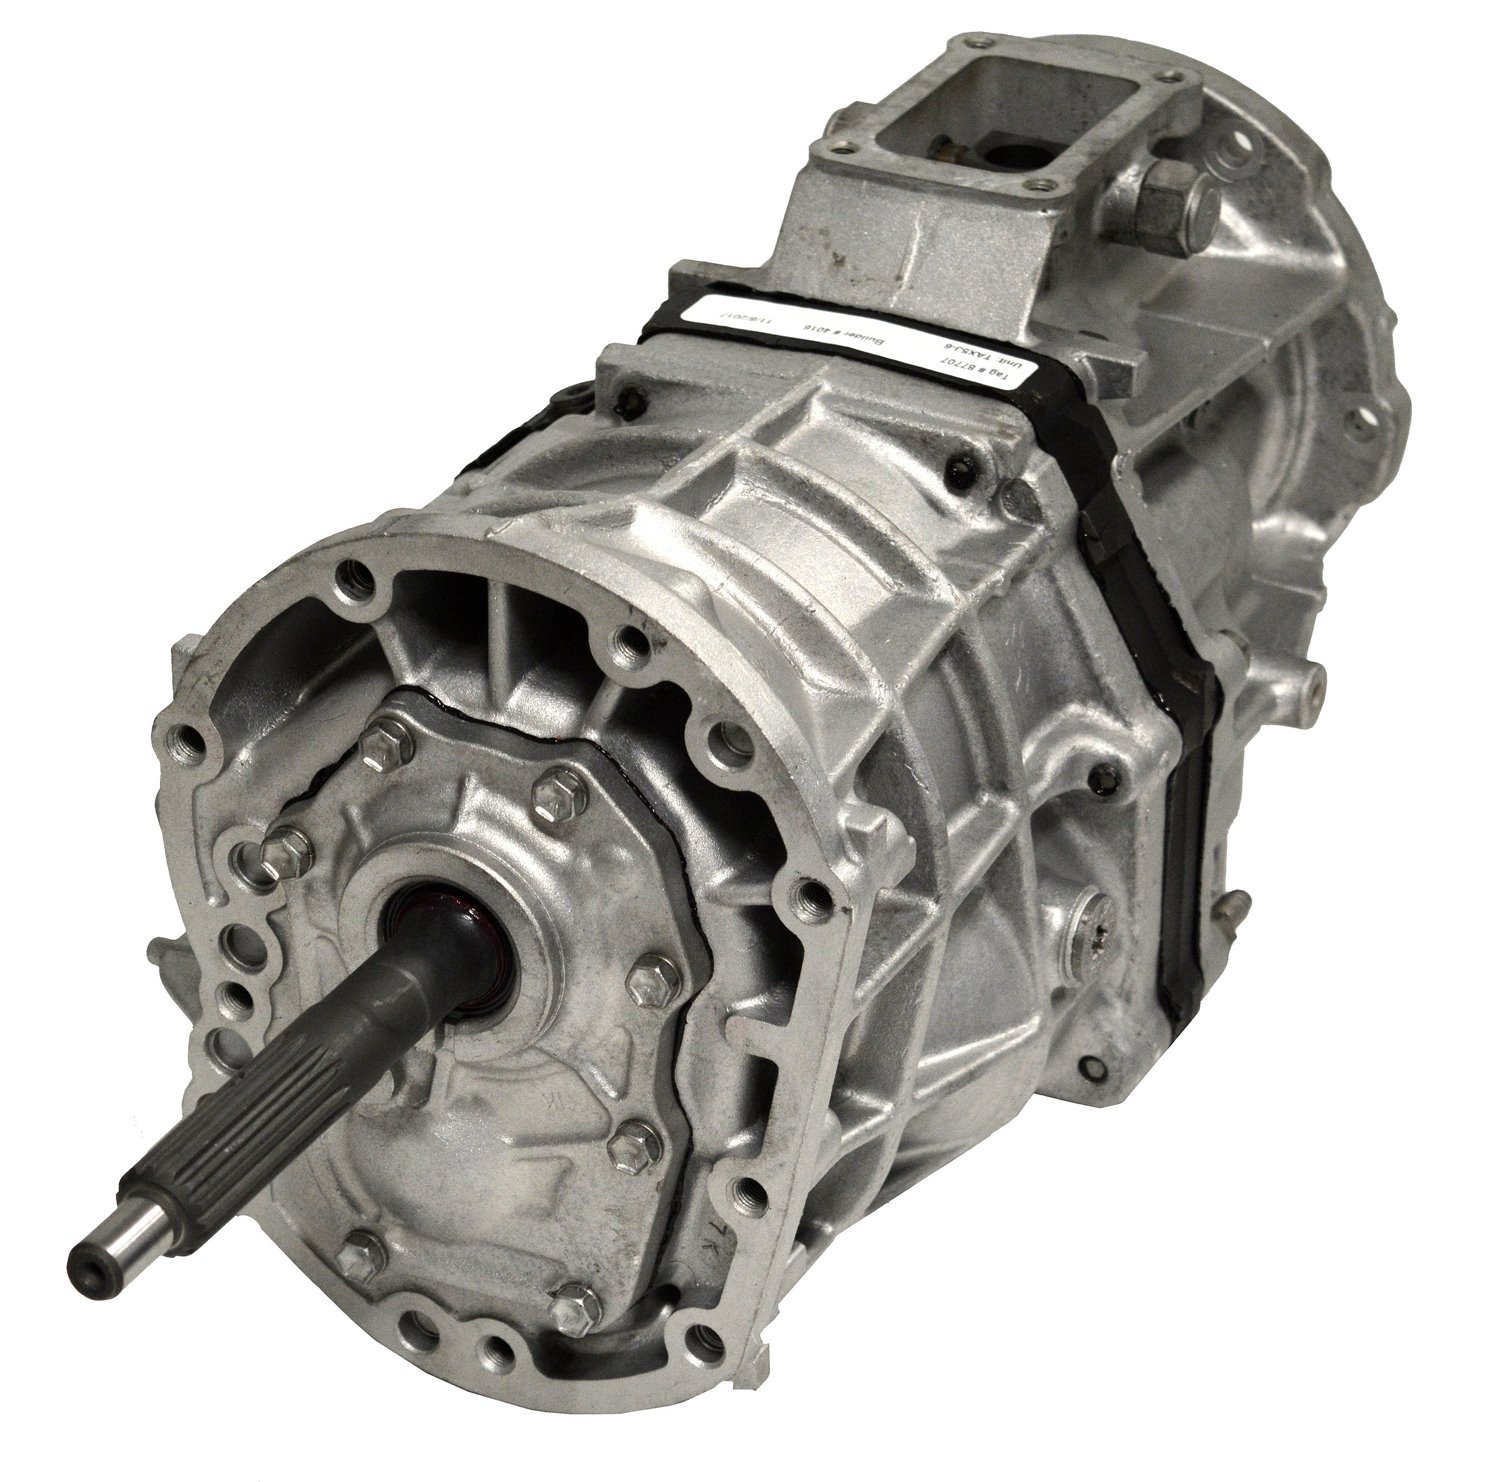 Remanufactured AX5 Manual Transmission for Jeep 87-91 Wrangler, 5 Speed